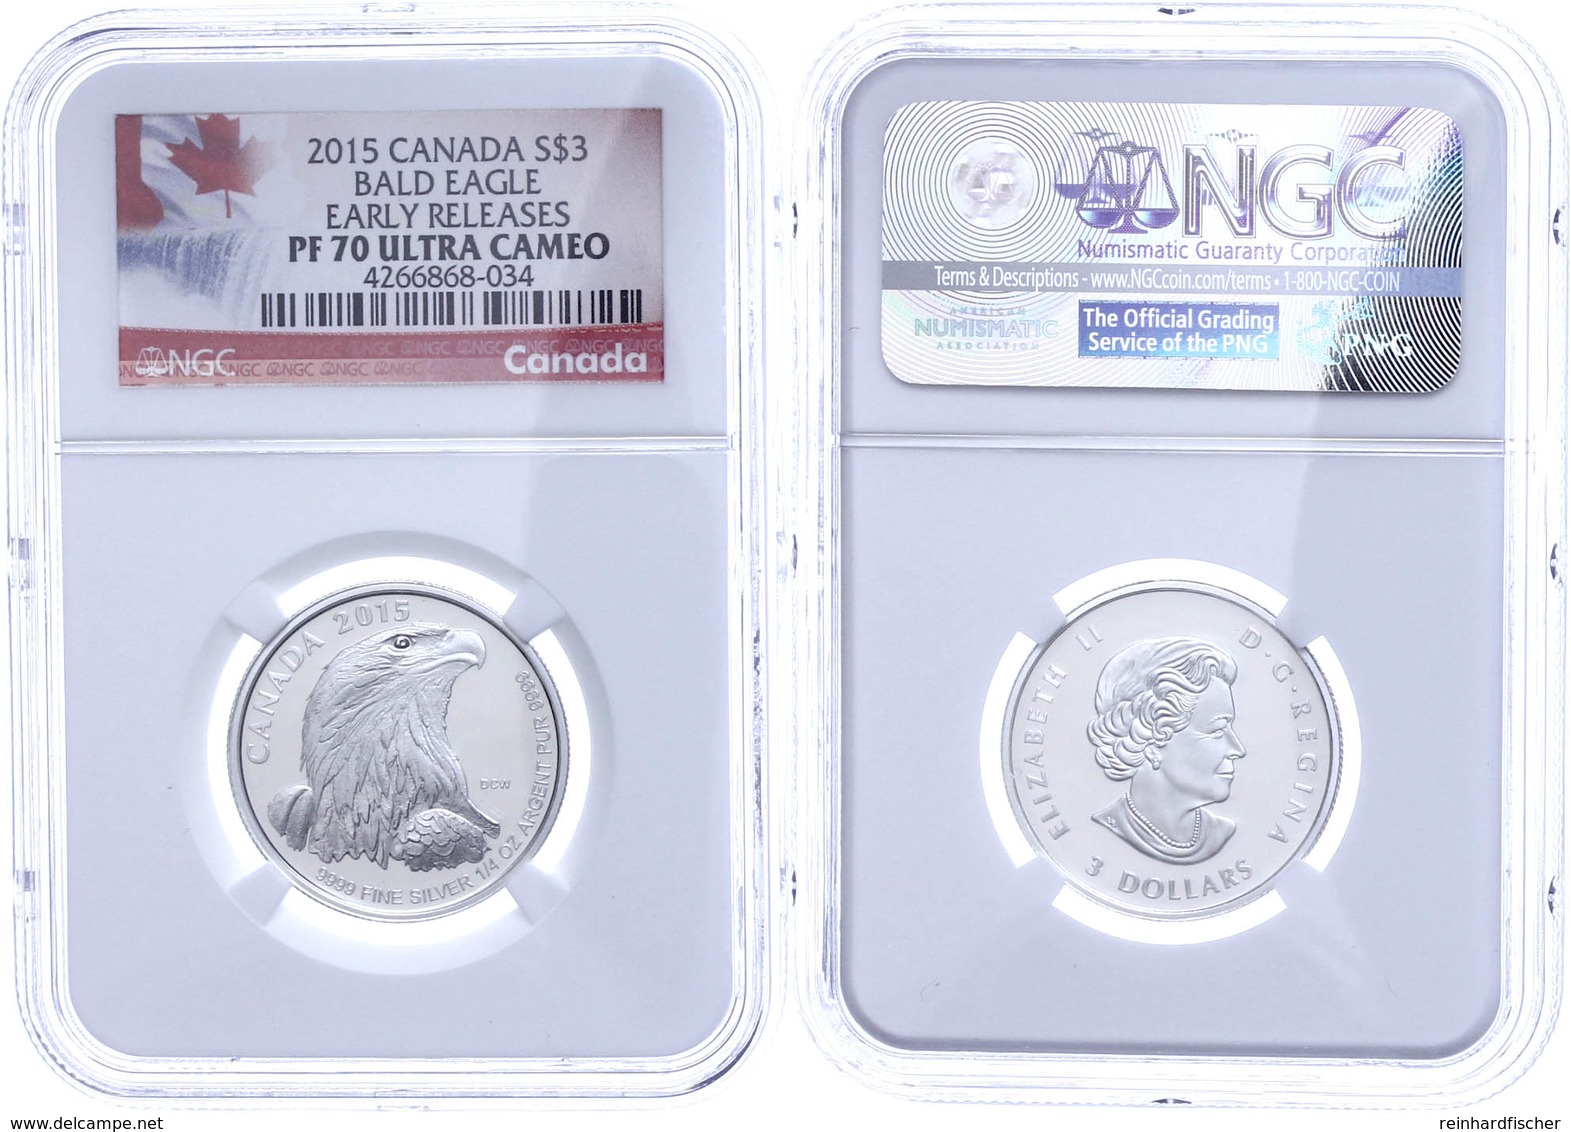 3 Dollars, 2015, Bald Eagle, In Slab Der NGC Mit Der Bewertung PF70 Ultra Cameo, Early Releases, Flag Label. - Canada